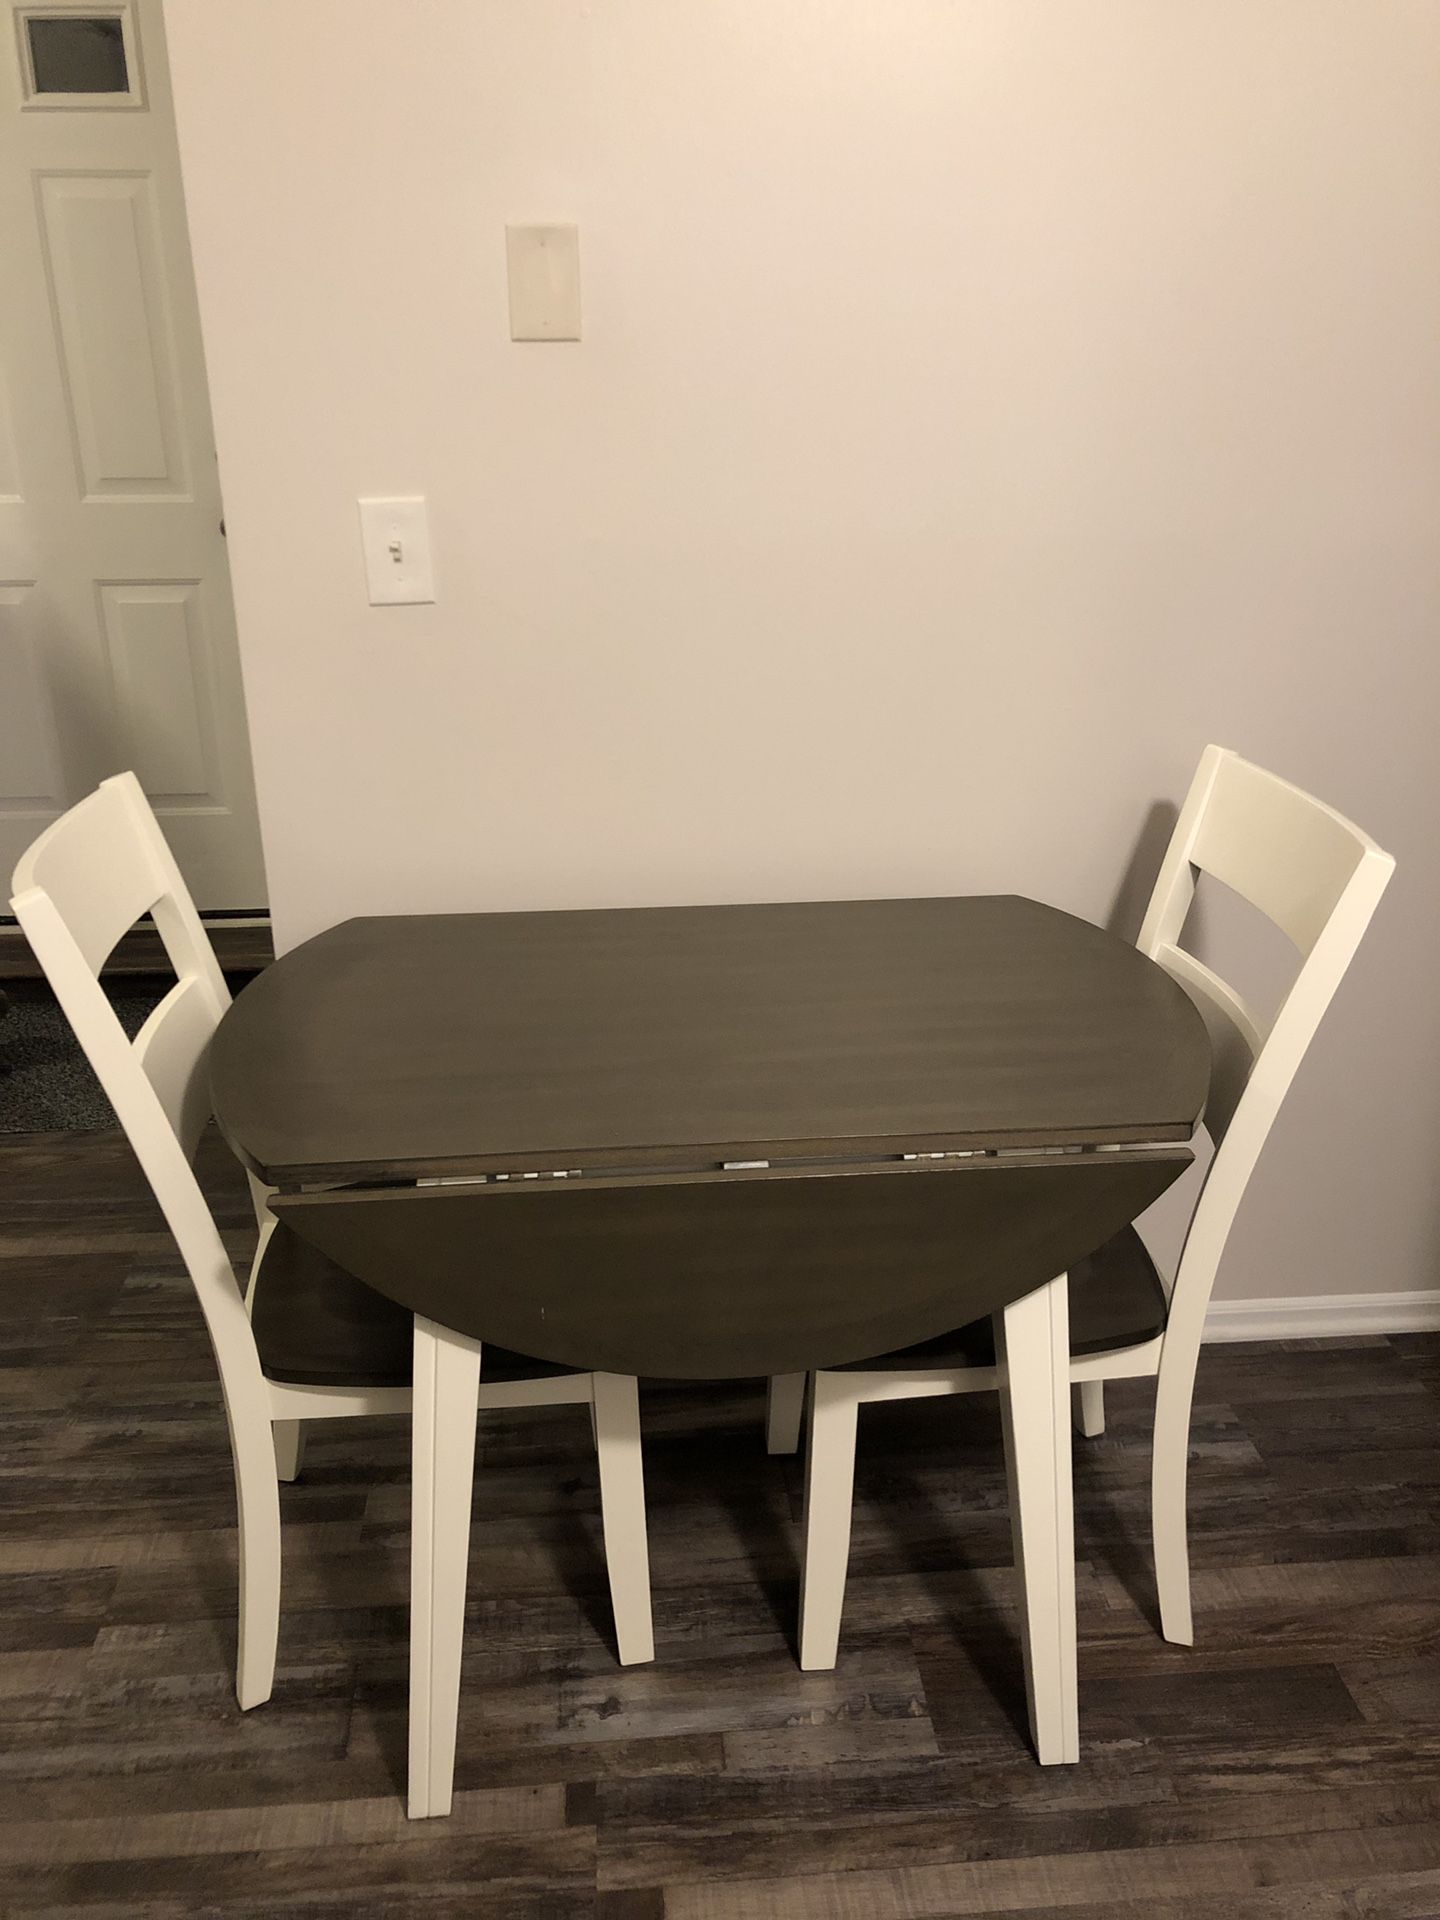 Kitchen Table with 2 chairs